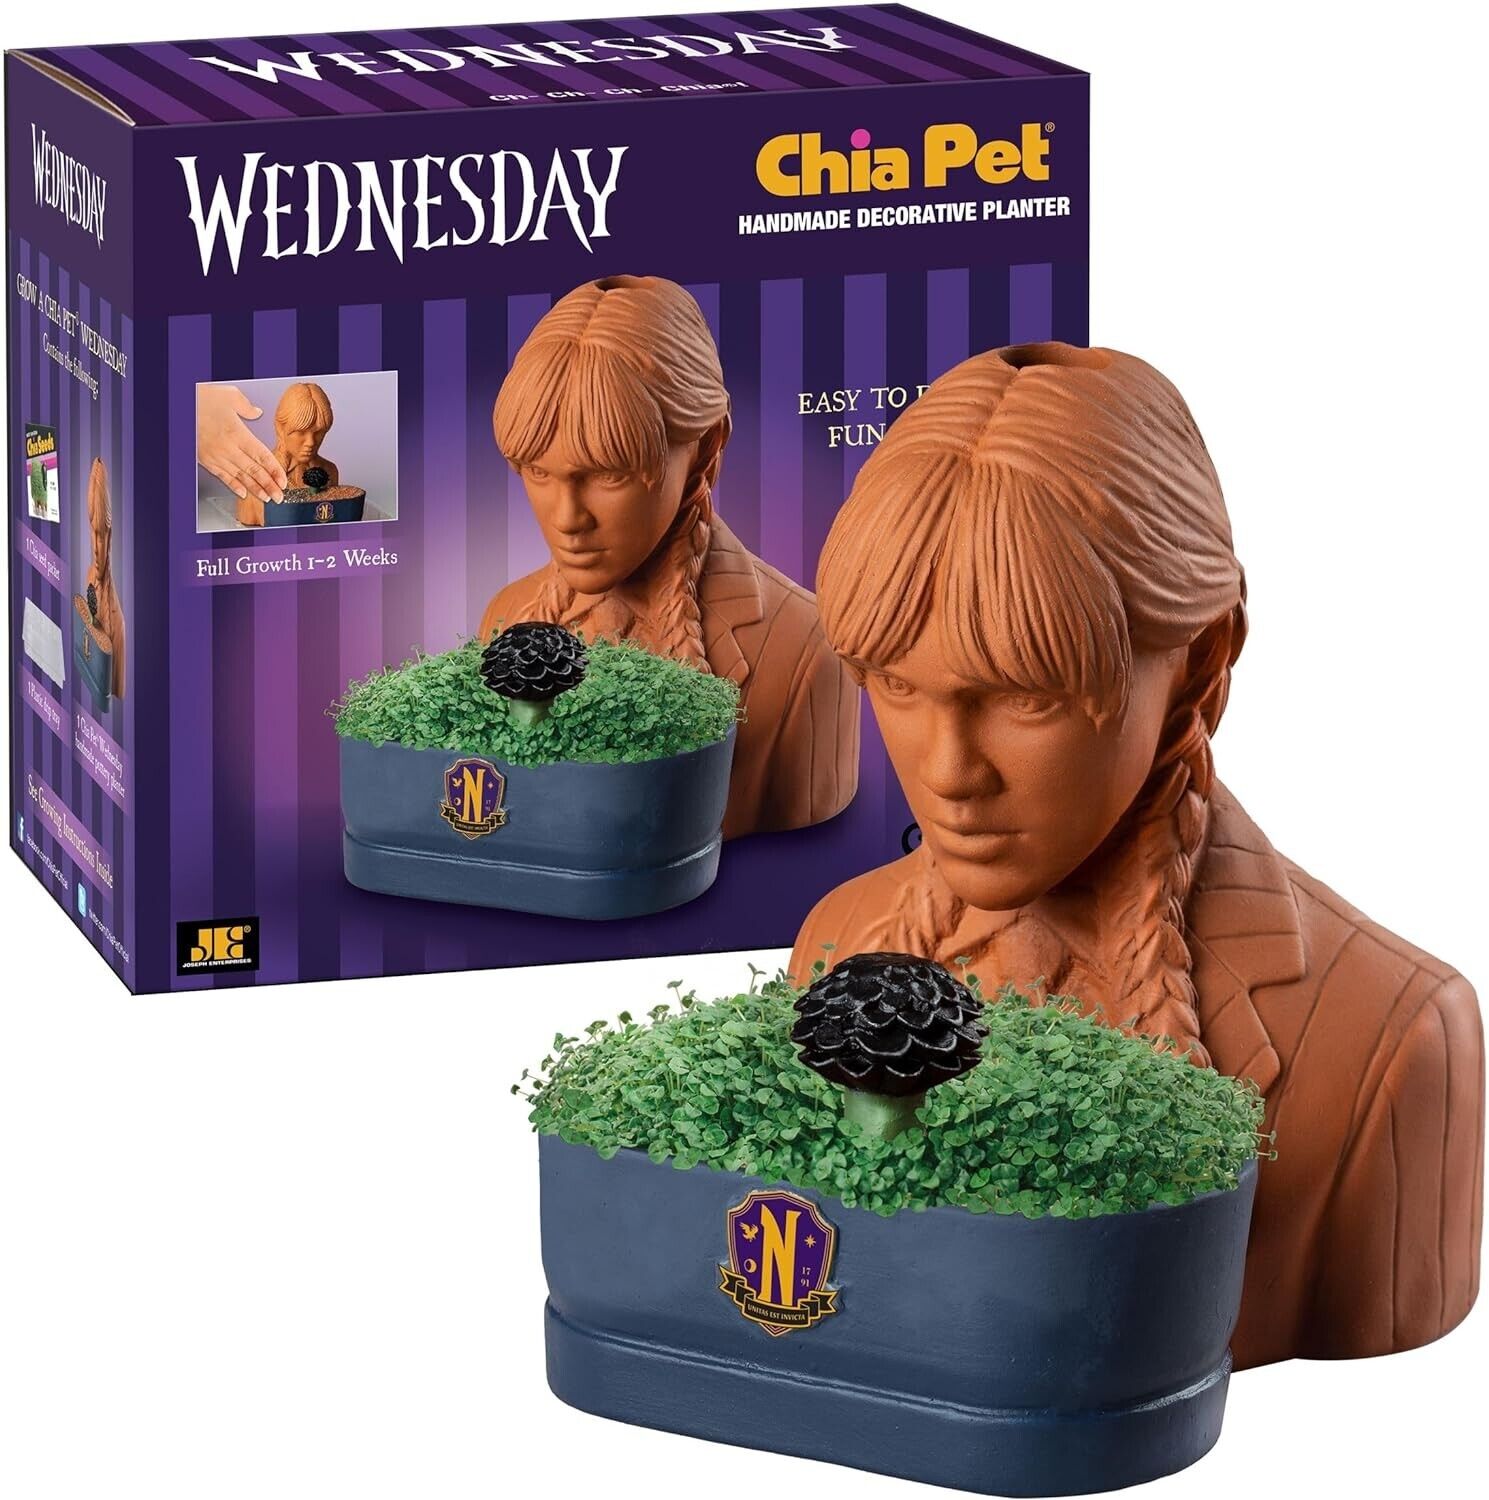 Chia Pet Wednesday with Seed Pack, Decorative Pottery Planter, Addams Family